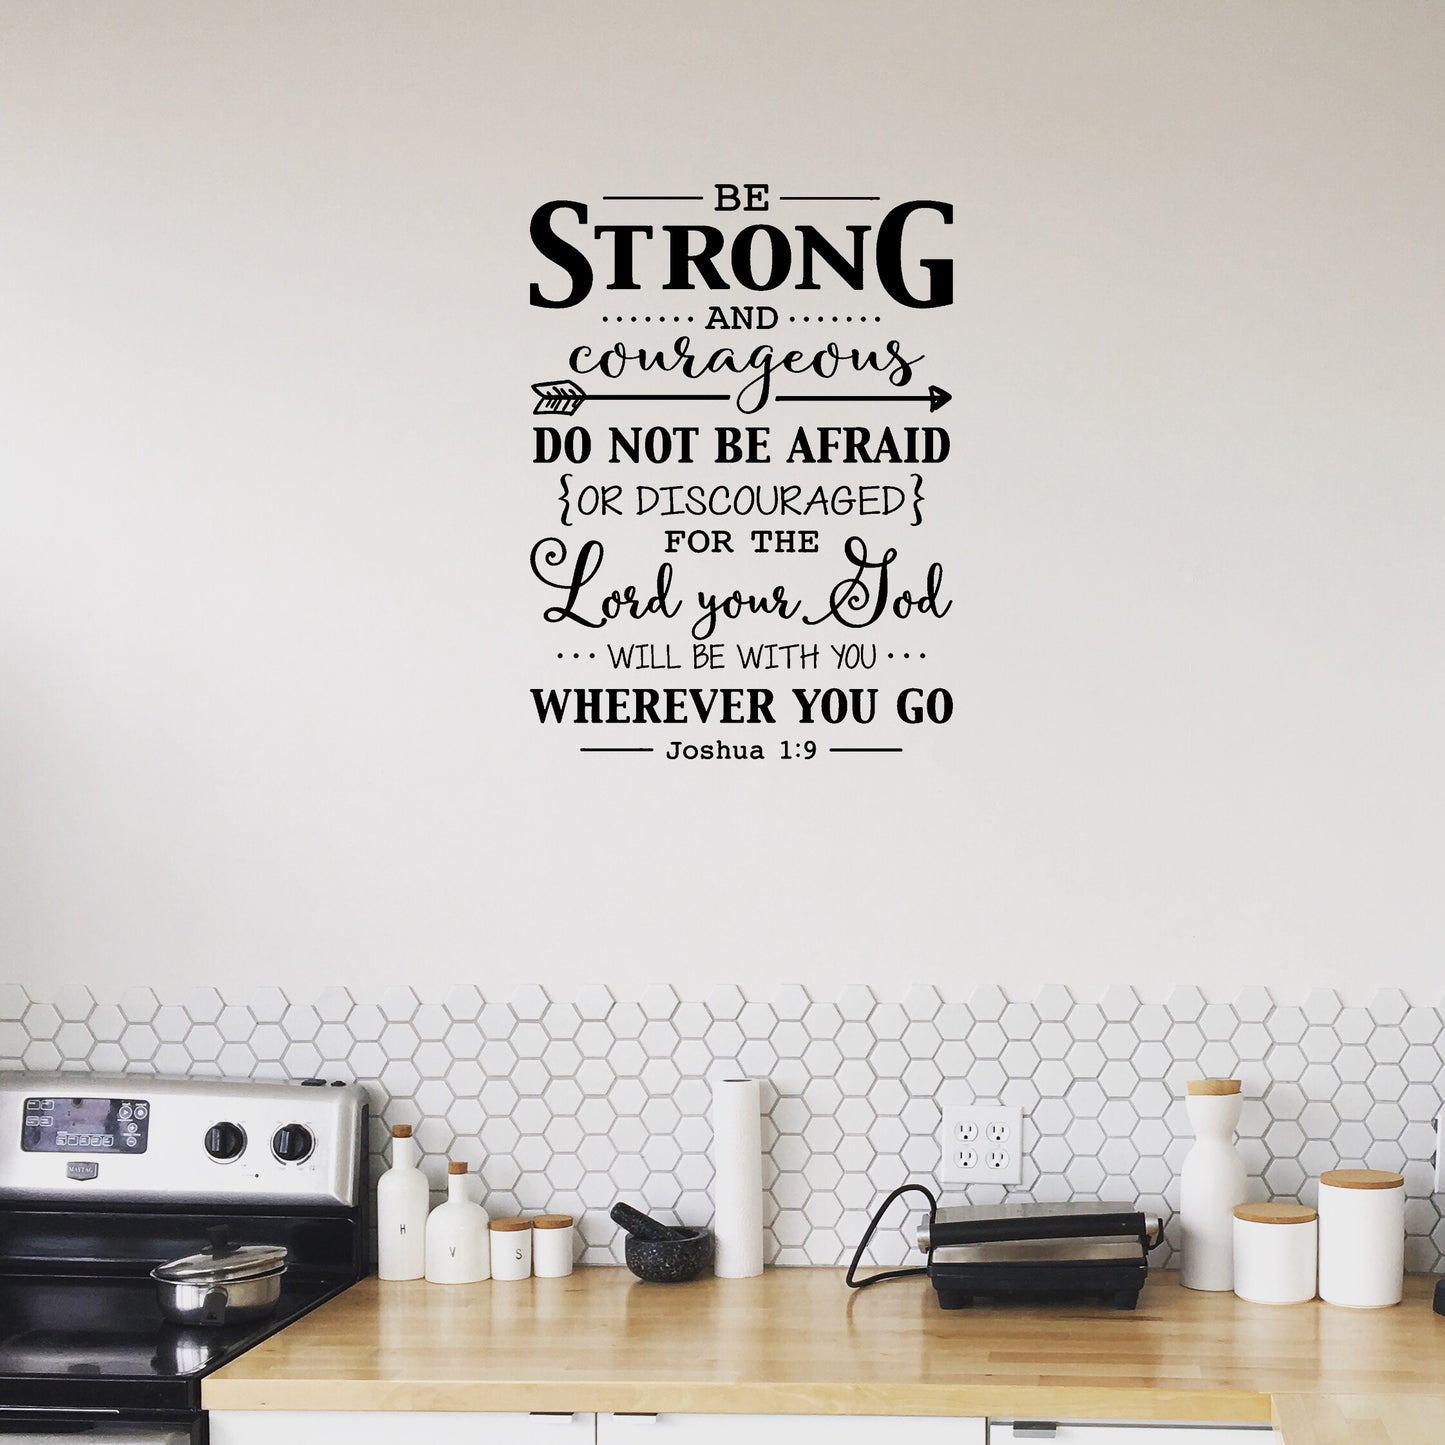 Be Strong and Courageous Wall Decal Sticker